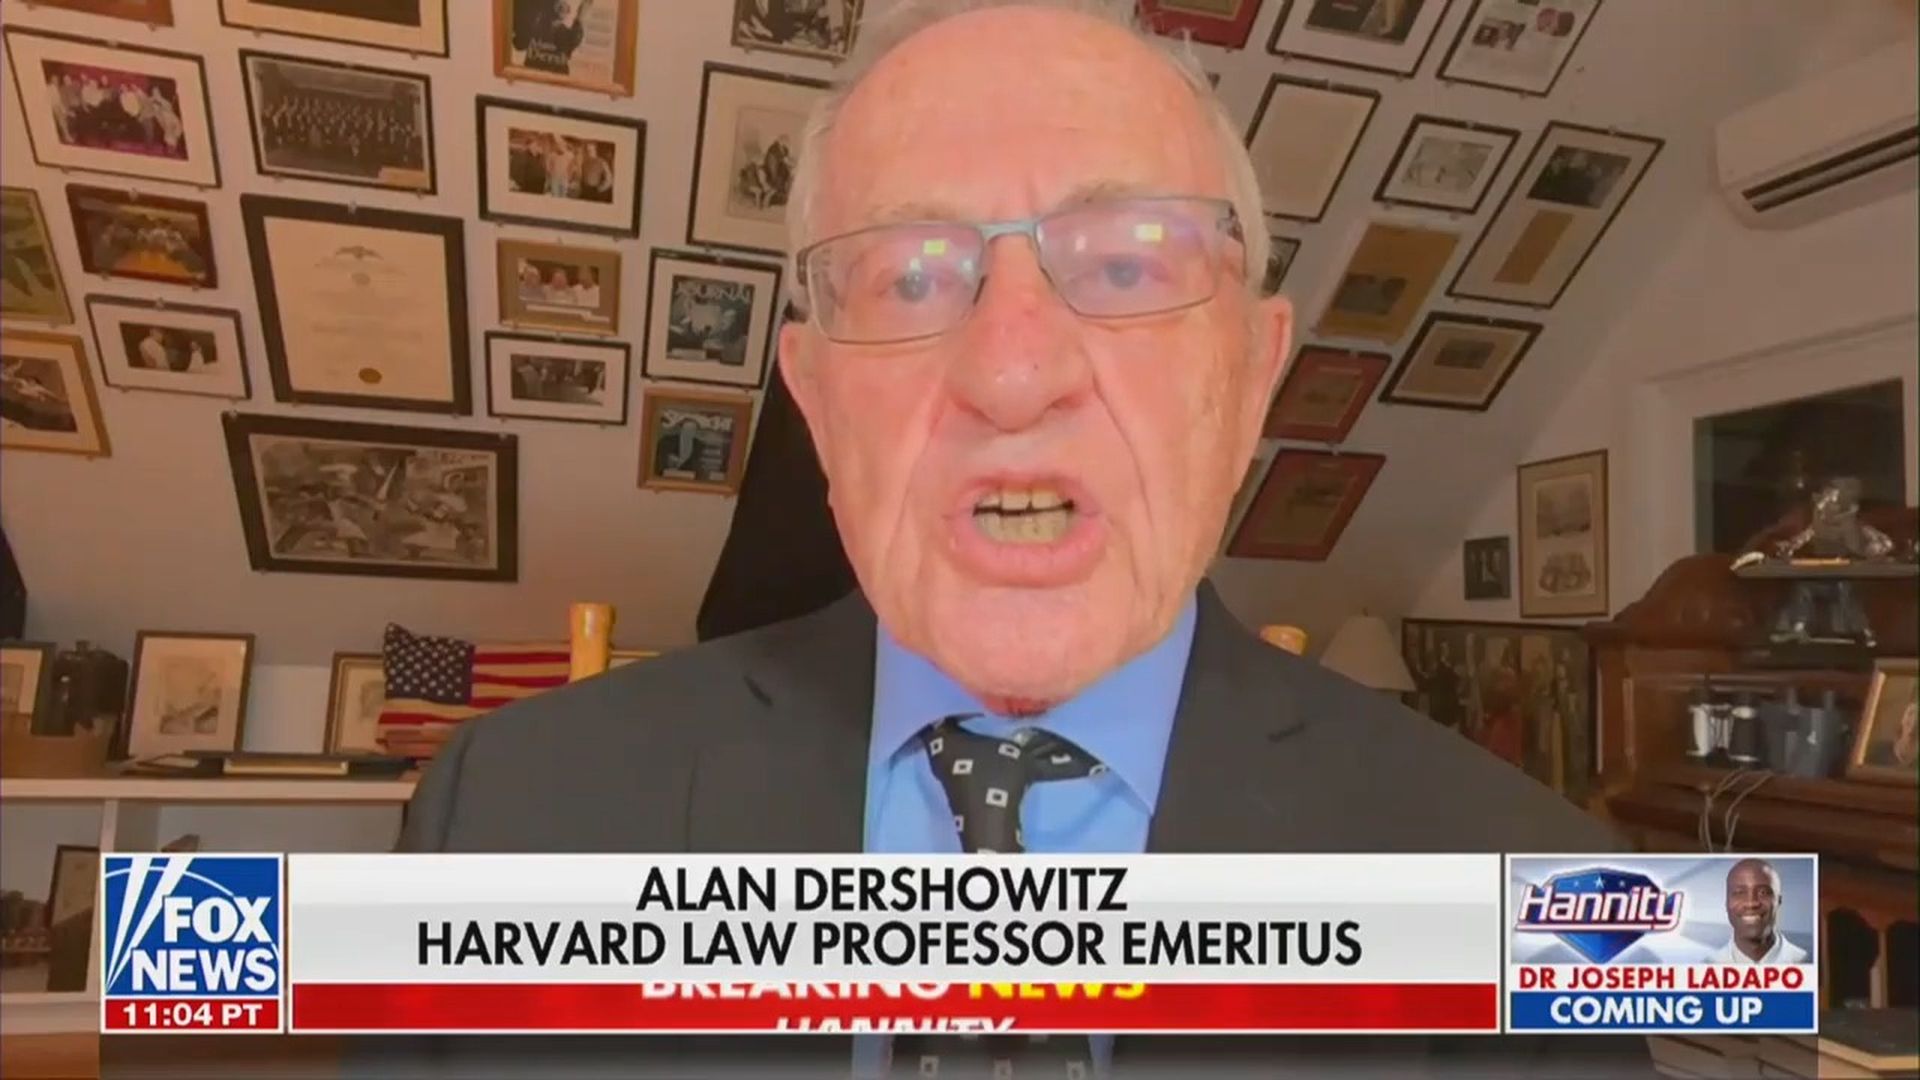 Alan Dershowitz Tells Fox News ‘There Is Enough Evidence Here to Indict Trump’